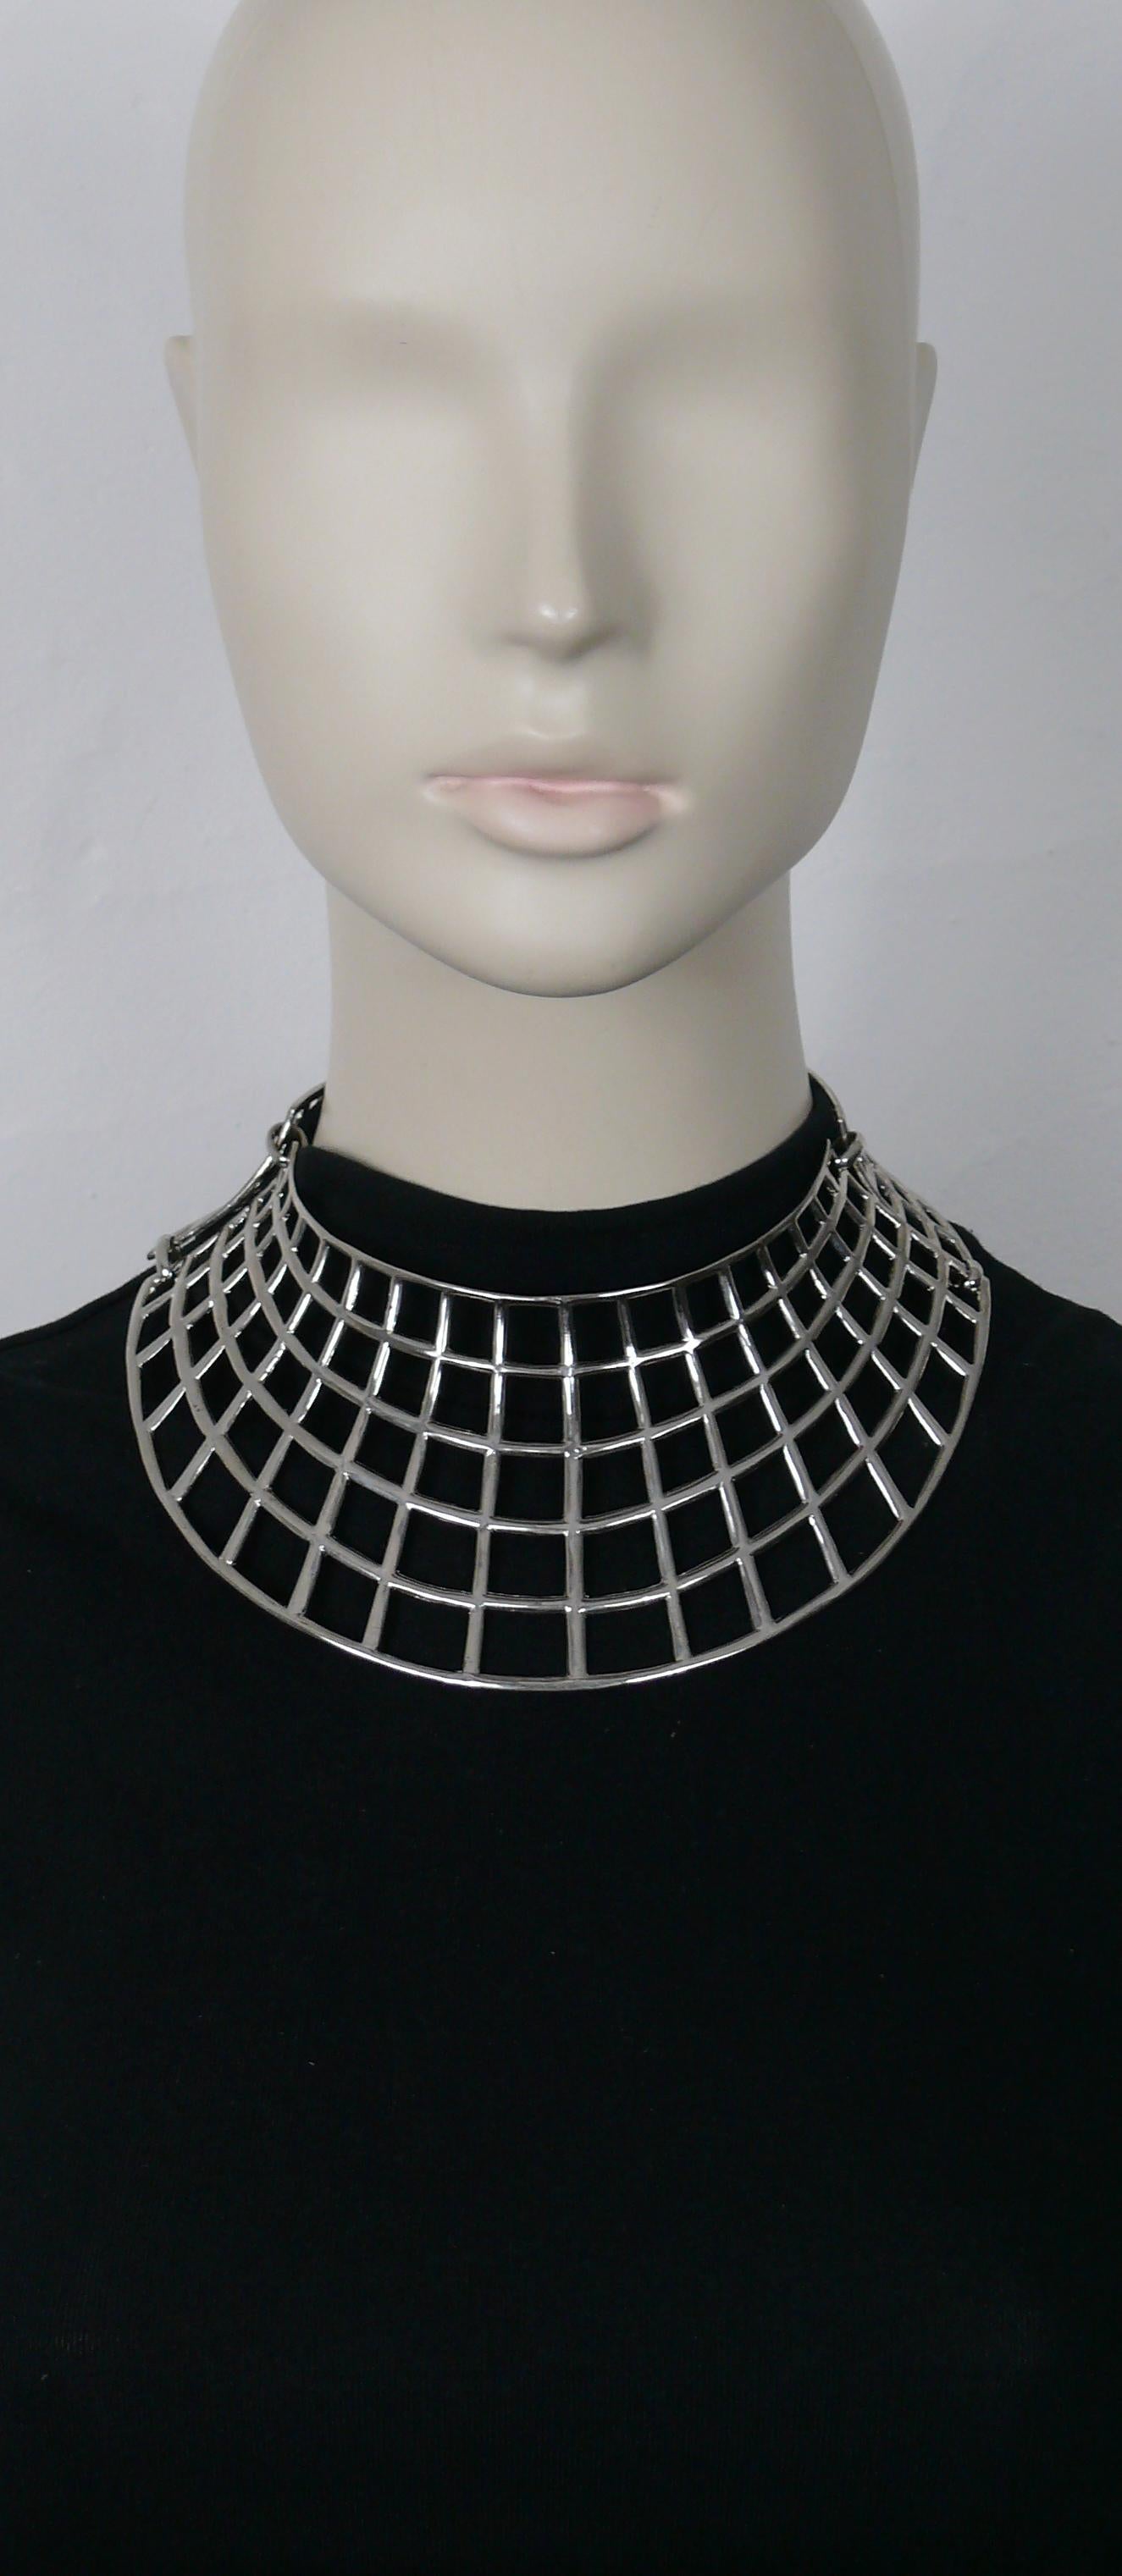 YVES SAINT LAURENT choker necklace featuring a grid design.

Silver tone metal hardware.

Adjustable S hook closure.

Embossed YVES SAINT LAURENT.

Indicative measurements : inner circumference approx. 32.99 cm (12.99 inches) / max. width approx.